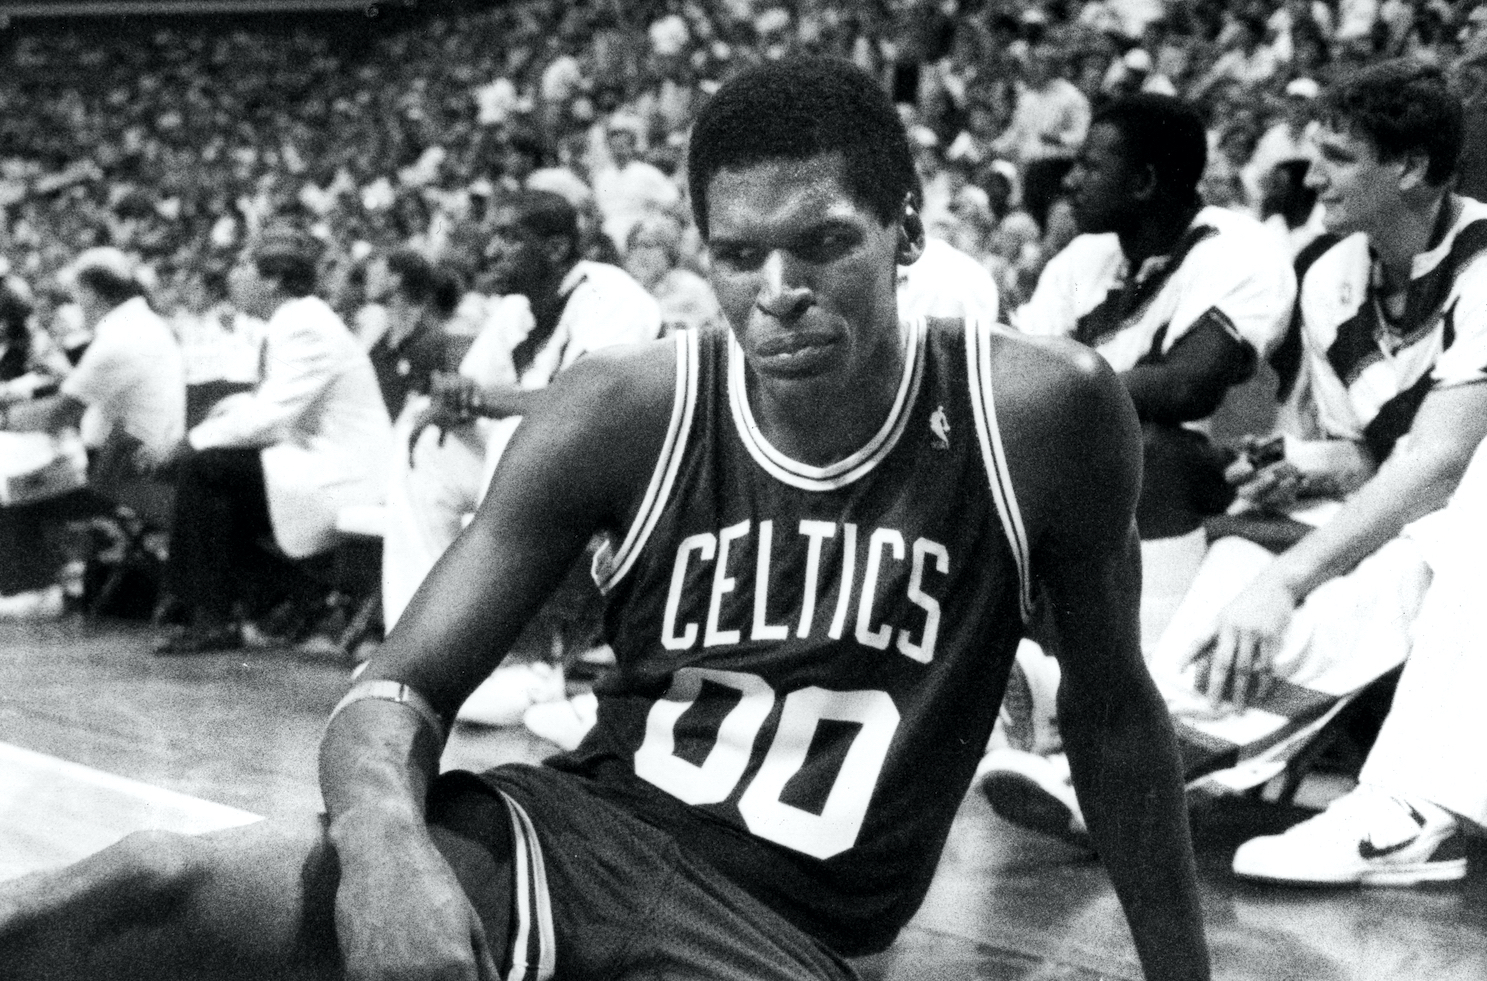 He might have had 90 - Robert Parish thought Michael Jordan could've done  the unthinkable during his 63-point performance on the Celtics, Basketball  Network